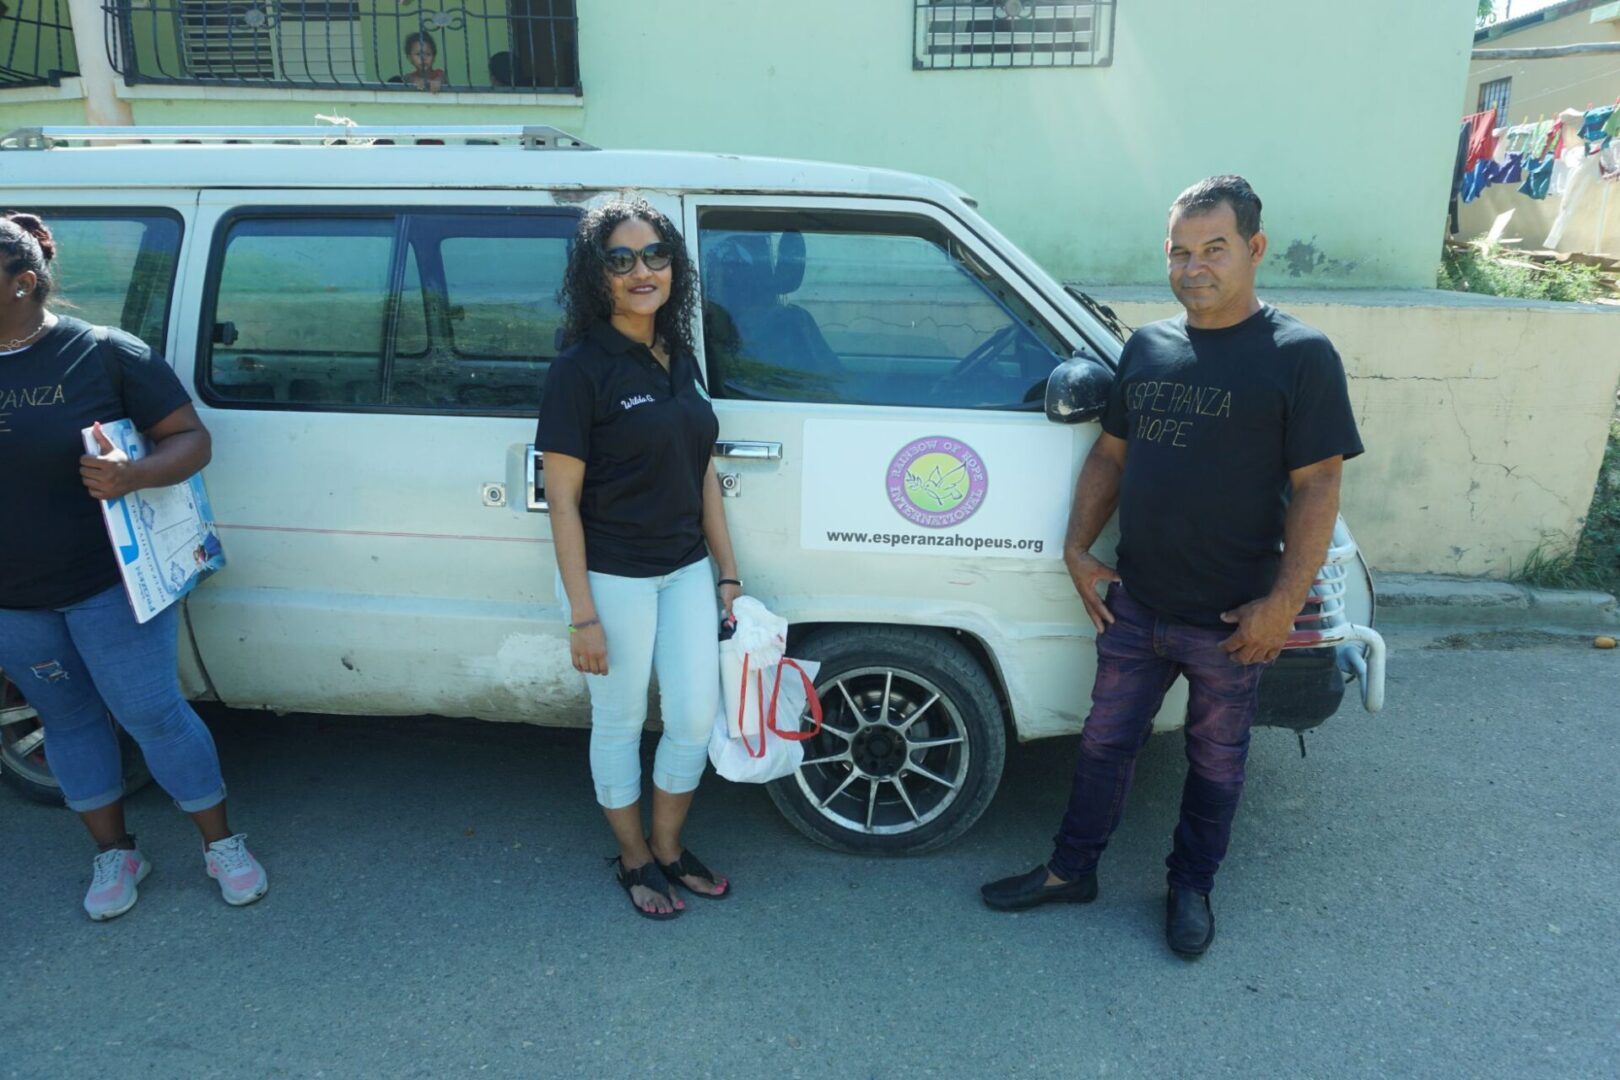 A male and female staff in front of Esperanza-Hope’s white van